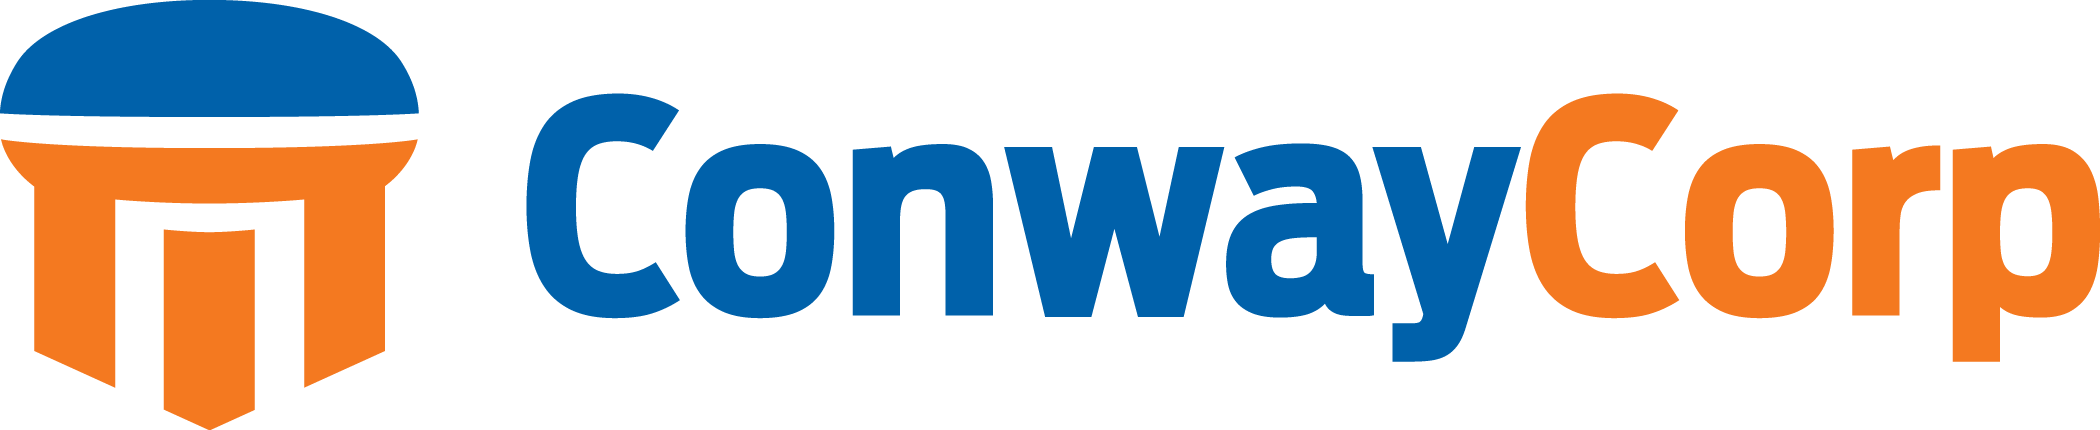 Conway Corp